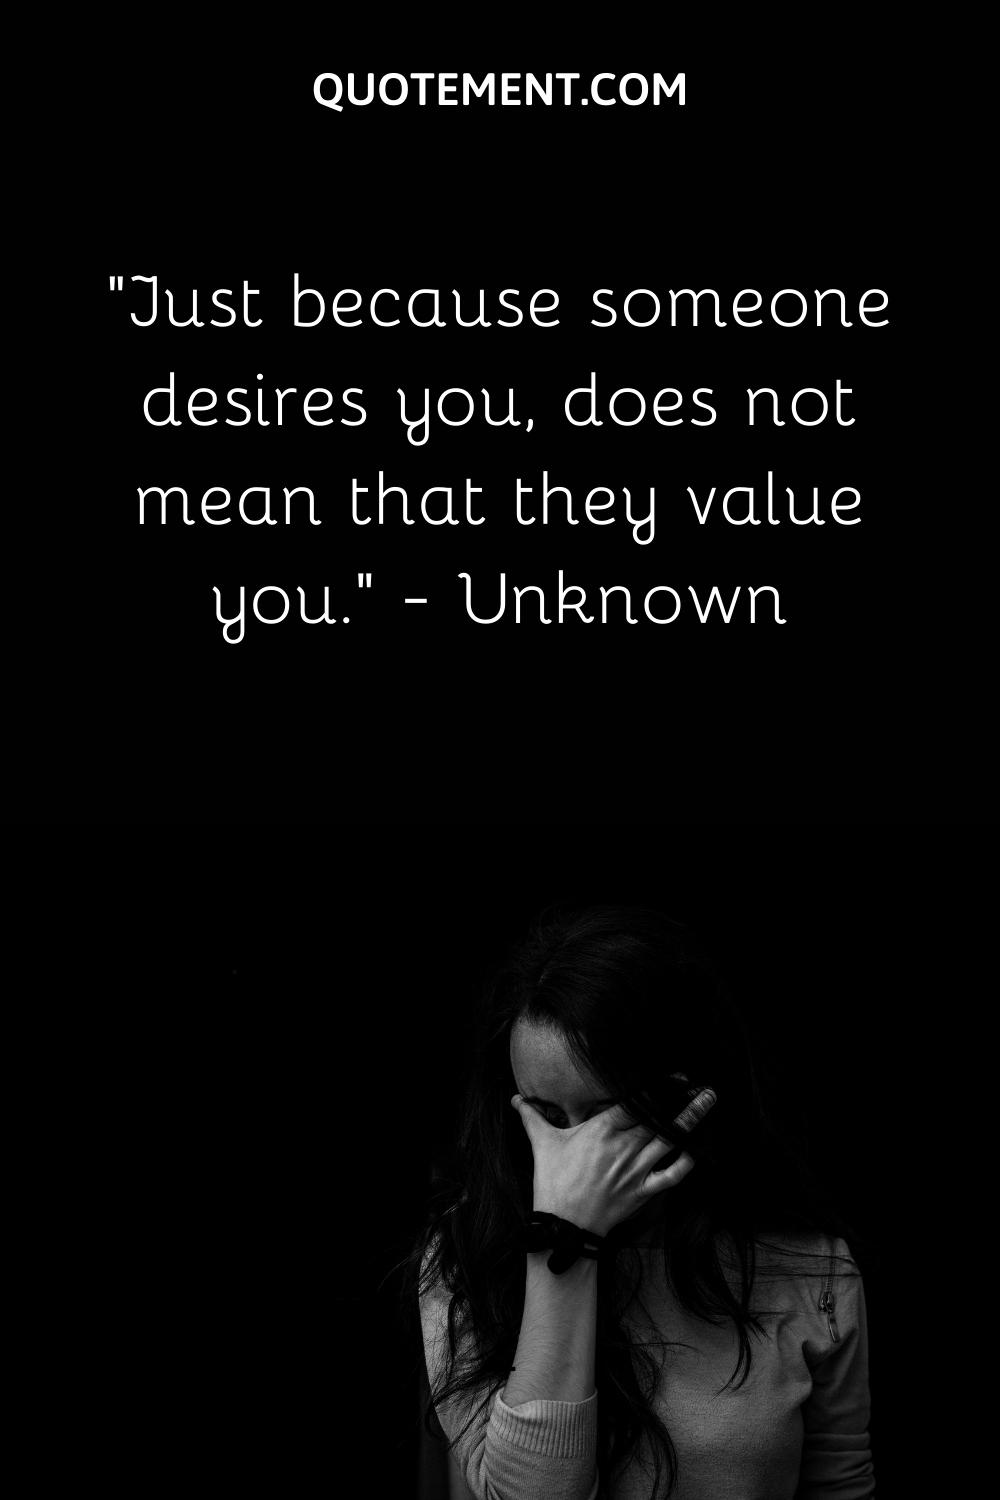 Just because someone desires you, does not mean that they value you